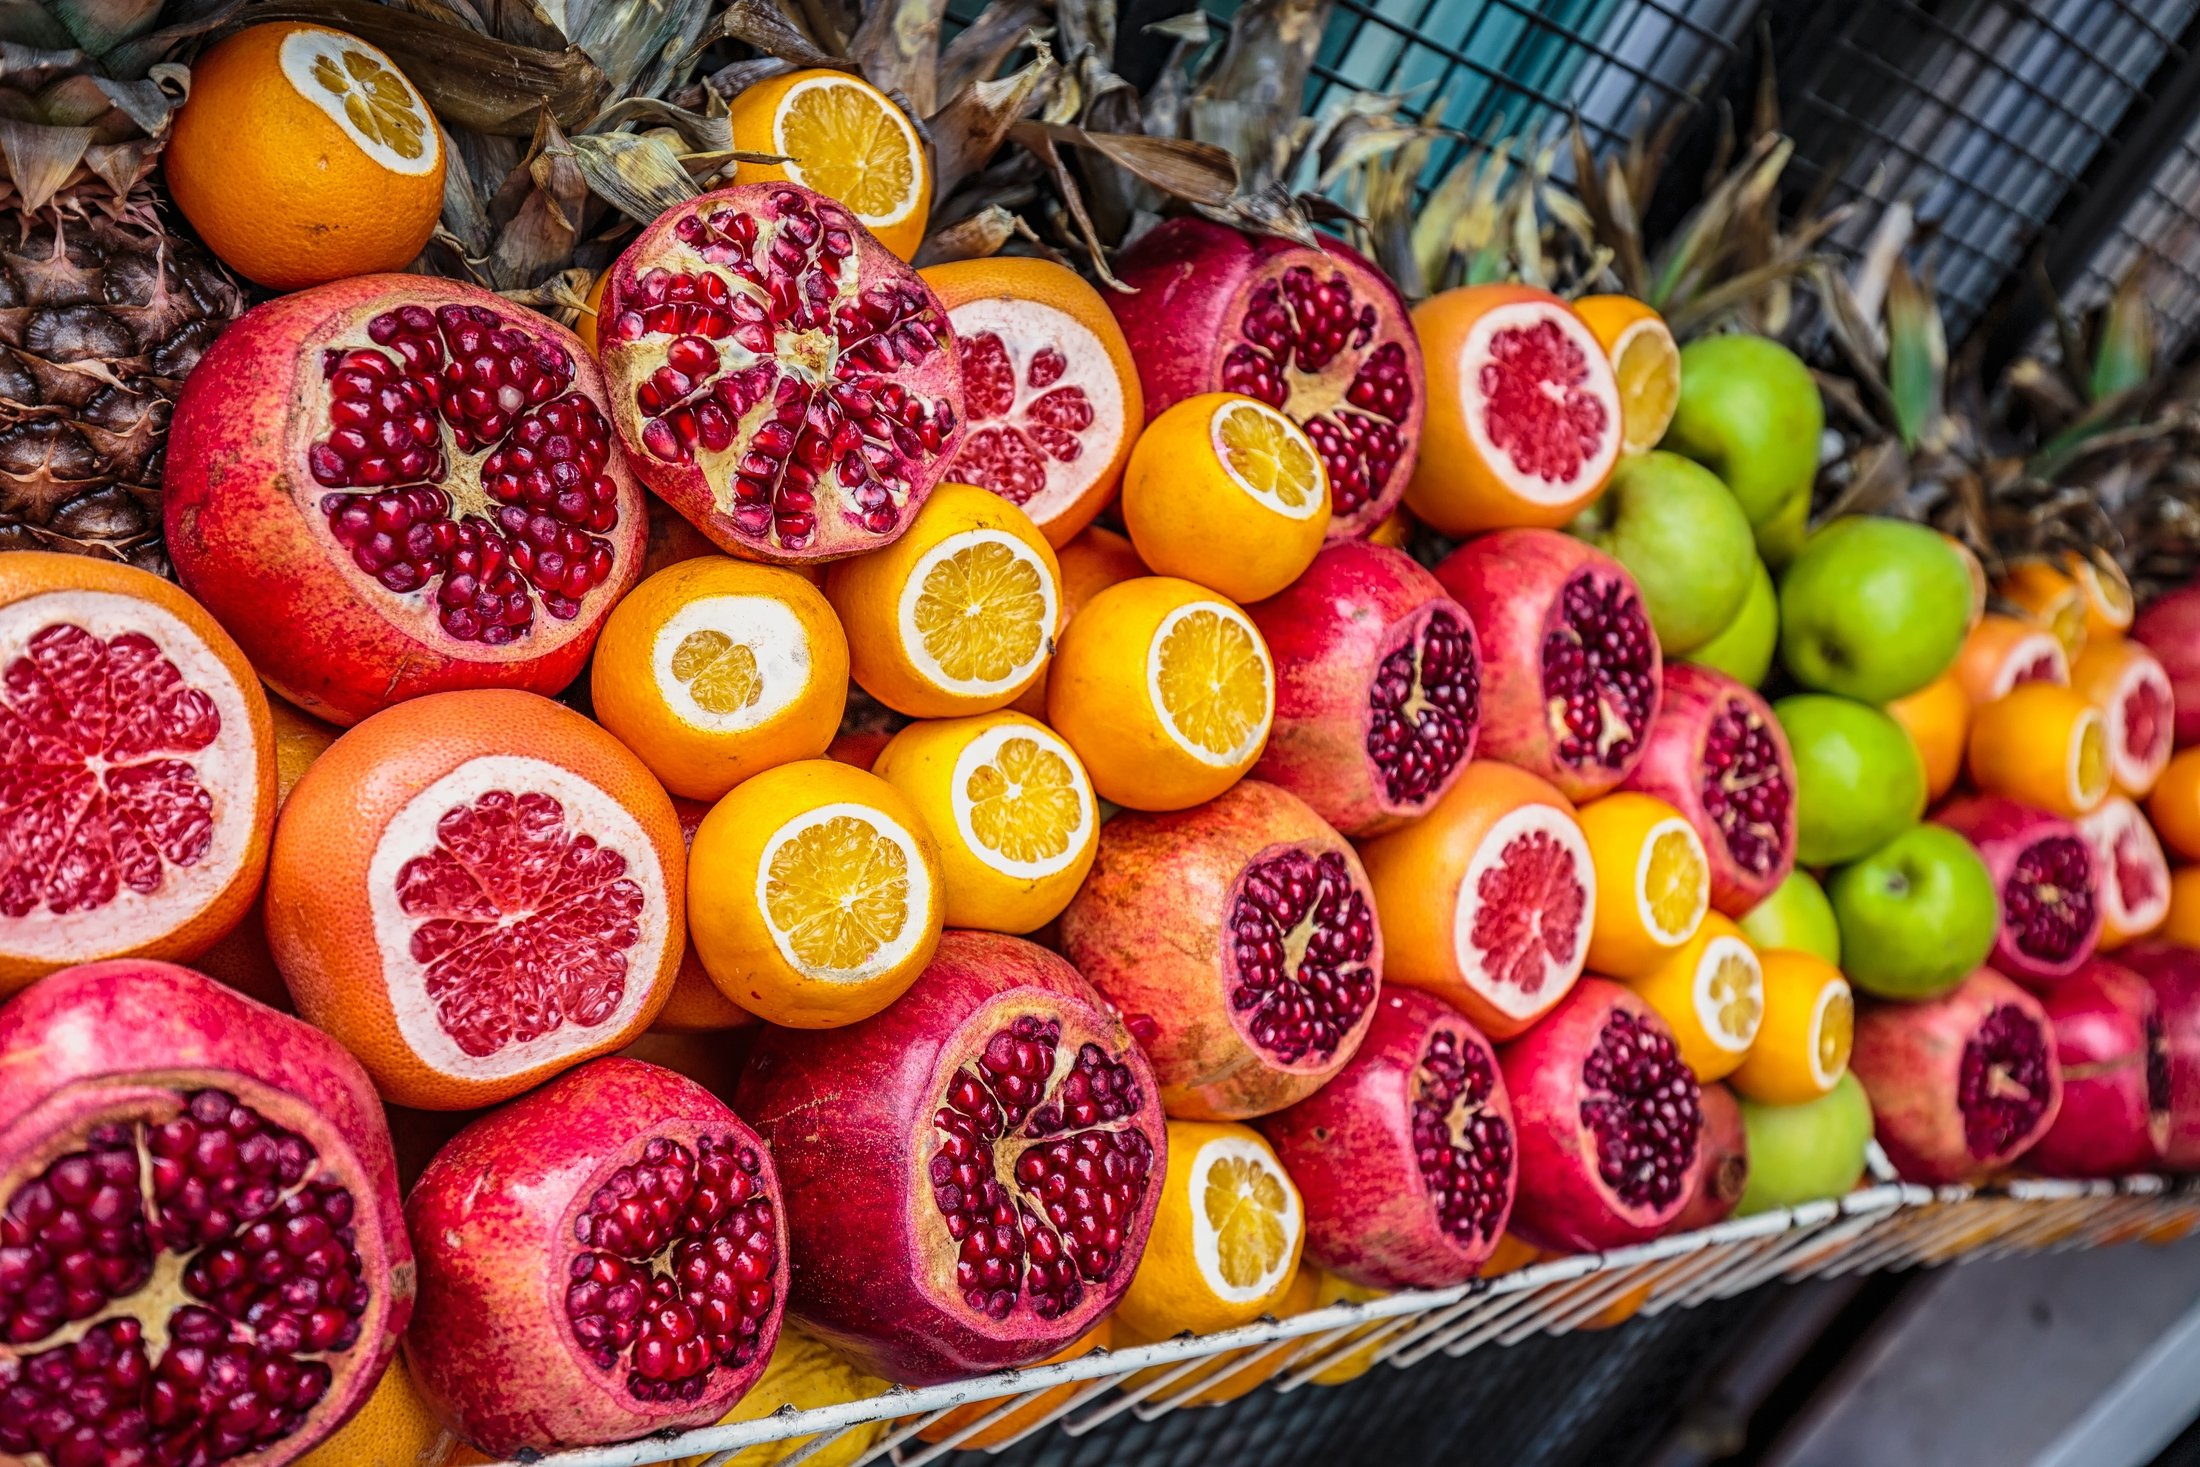 A variety of fresh pomegranate and oranges in a shop in the Grand Bazaar, Istanbul, Türkiye. (Shutterstock Photo)